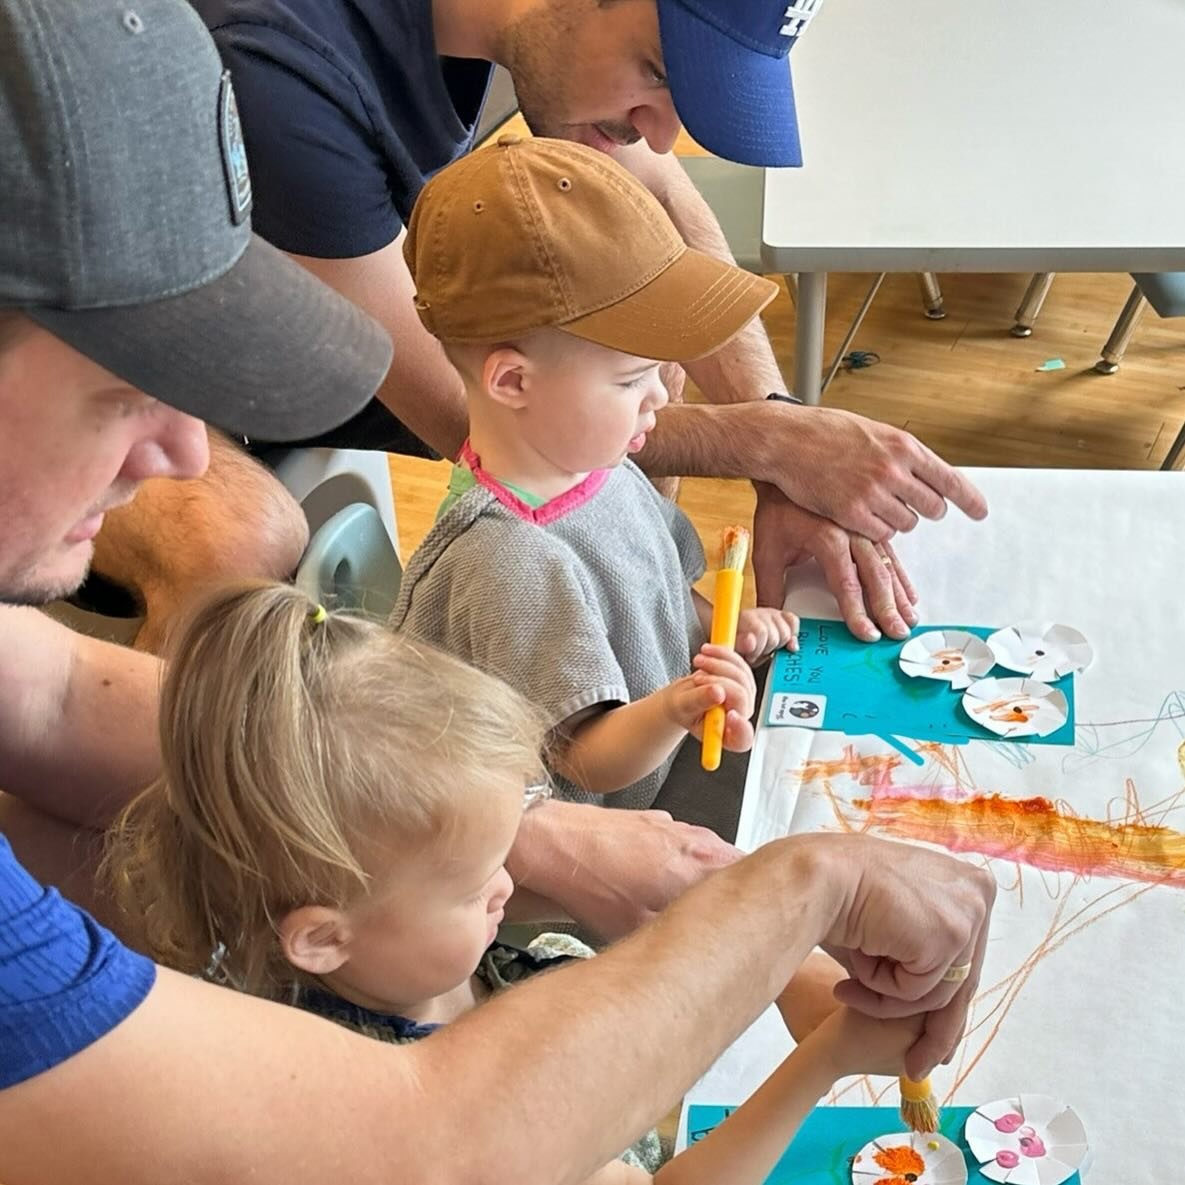 What a happy weekend with our Dads😊

Drop-in for more fun and learning this week!

Spots available:

Monday
🇲🇽 Buenas Tardes Tots (Spanish 1-3y) 4p

Tuesday
👣Teeter Toddlers (developmental 13-20mos) 9a
📚 Little Wordlings-Language Lab with  SLP 1